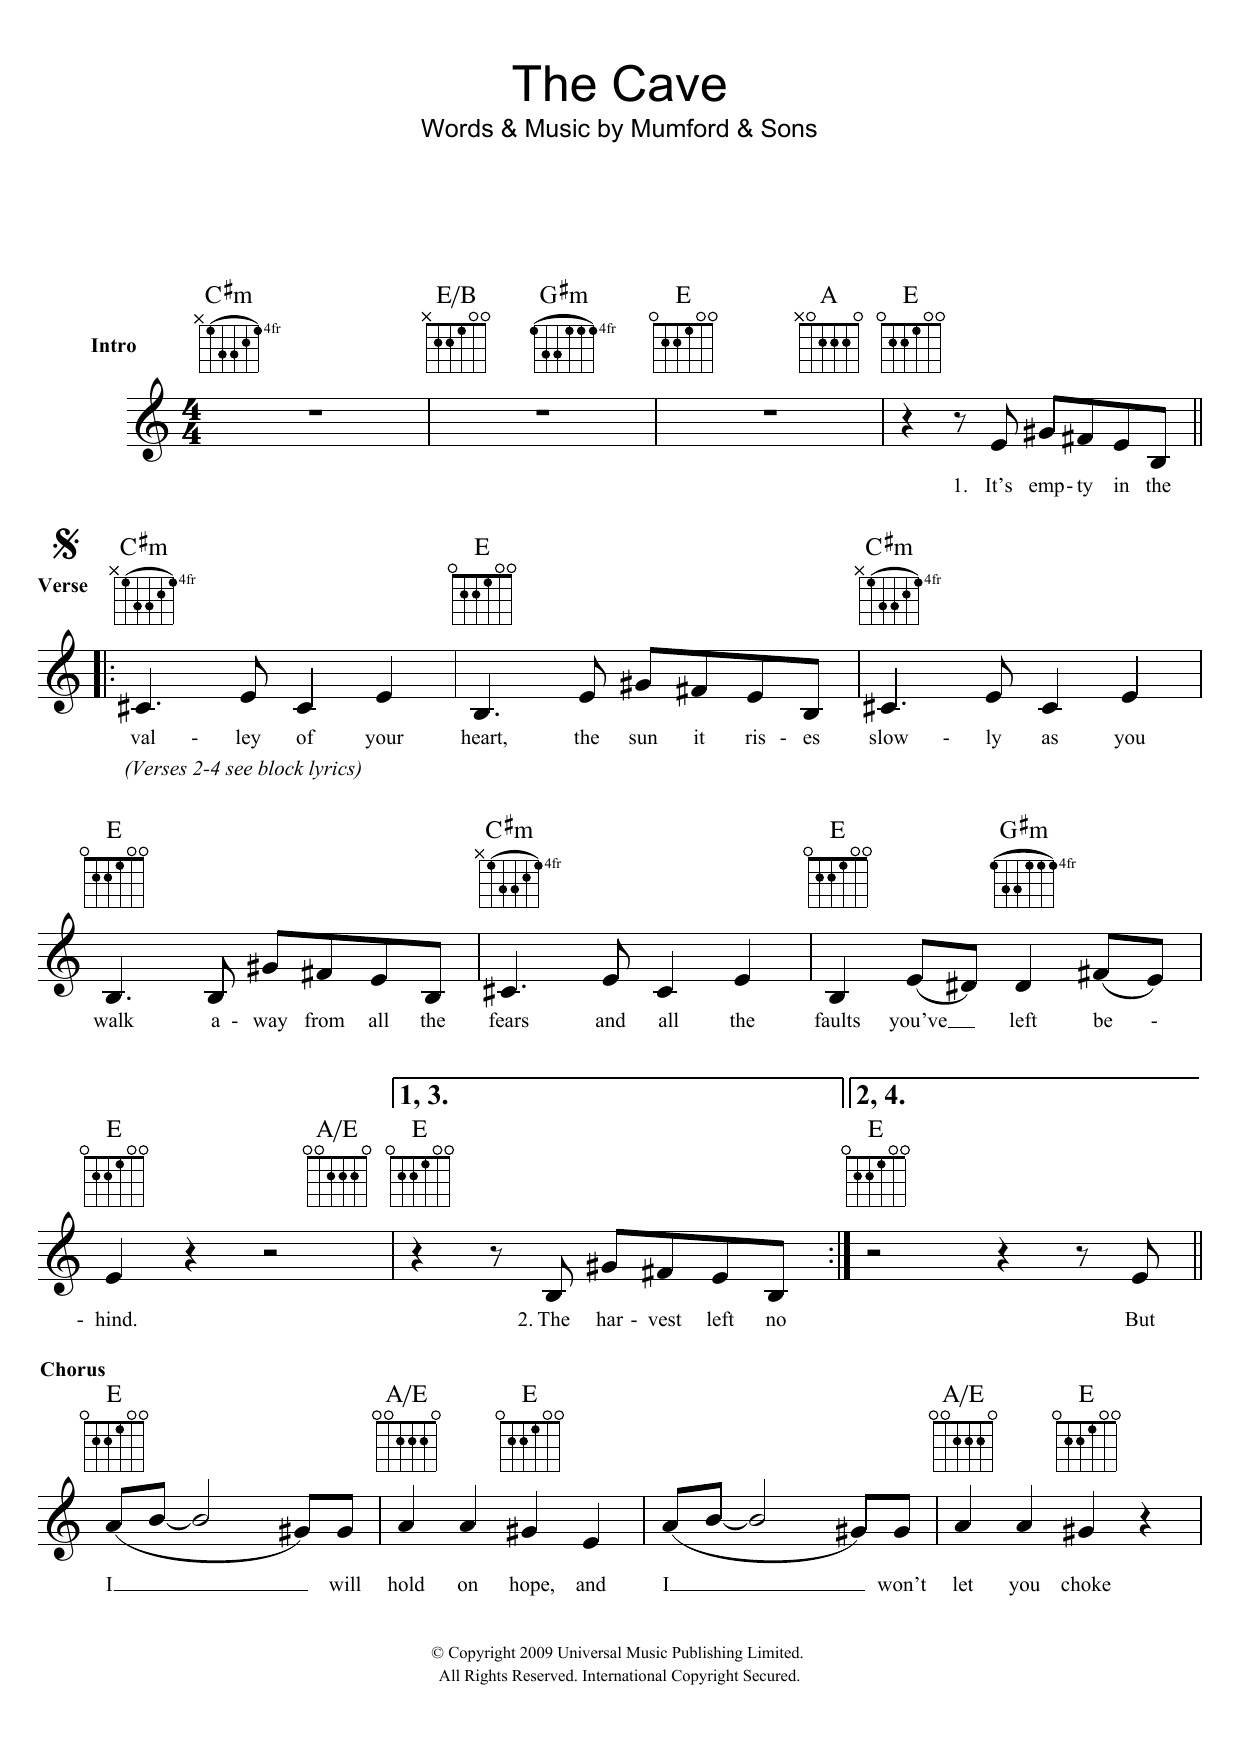 Download Mumford & Sons The Cave Sheet Music